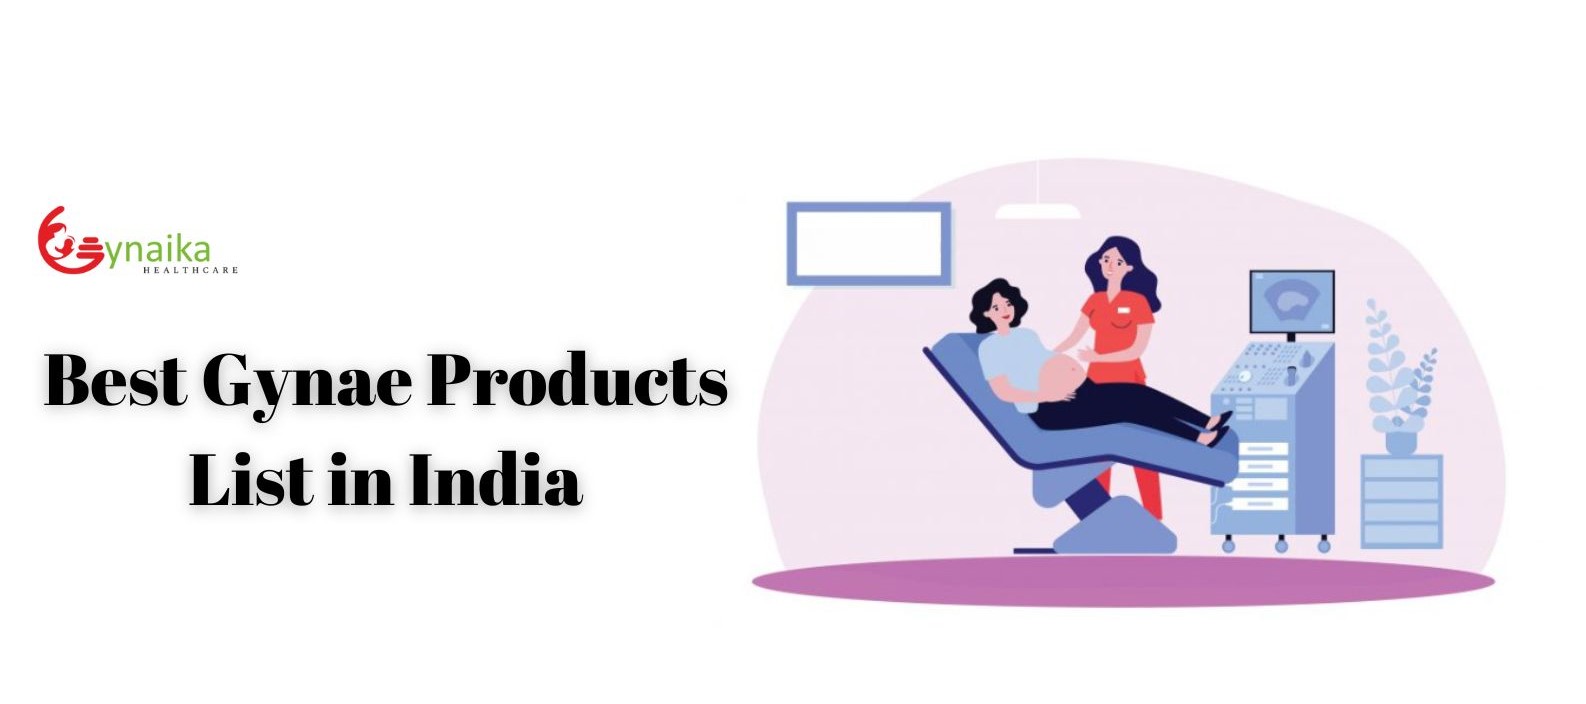 Best Gynae Products List in India